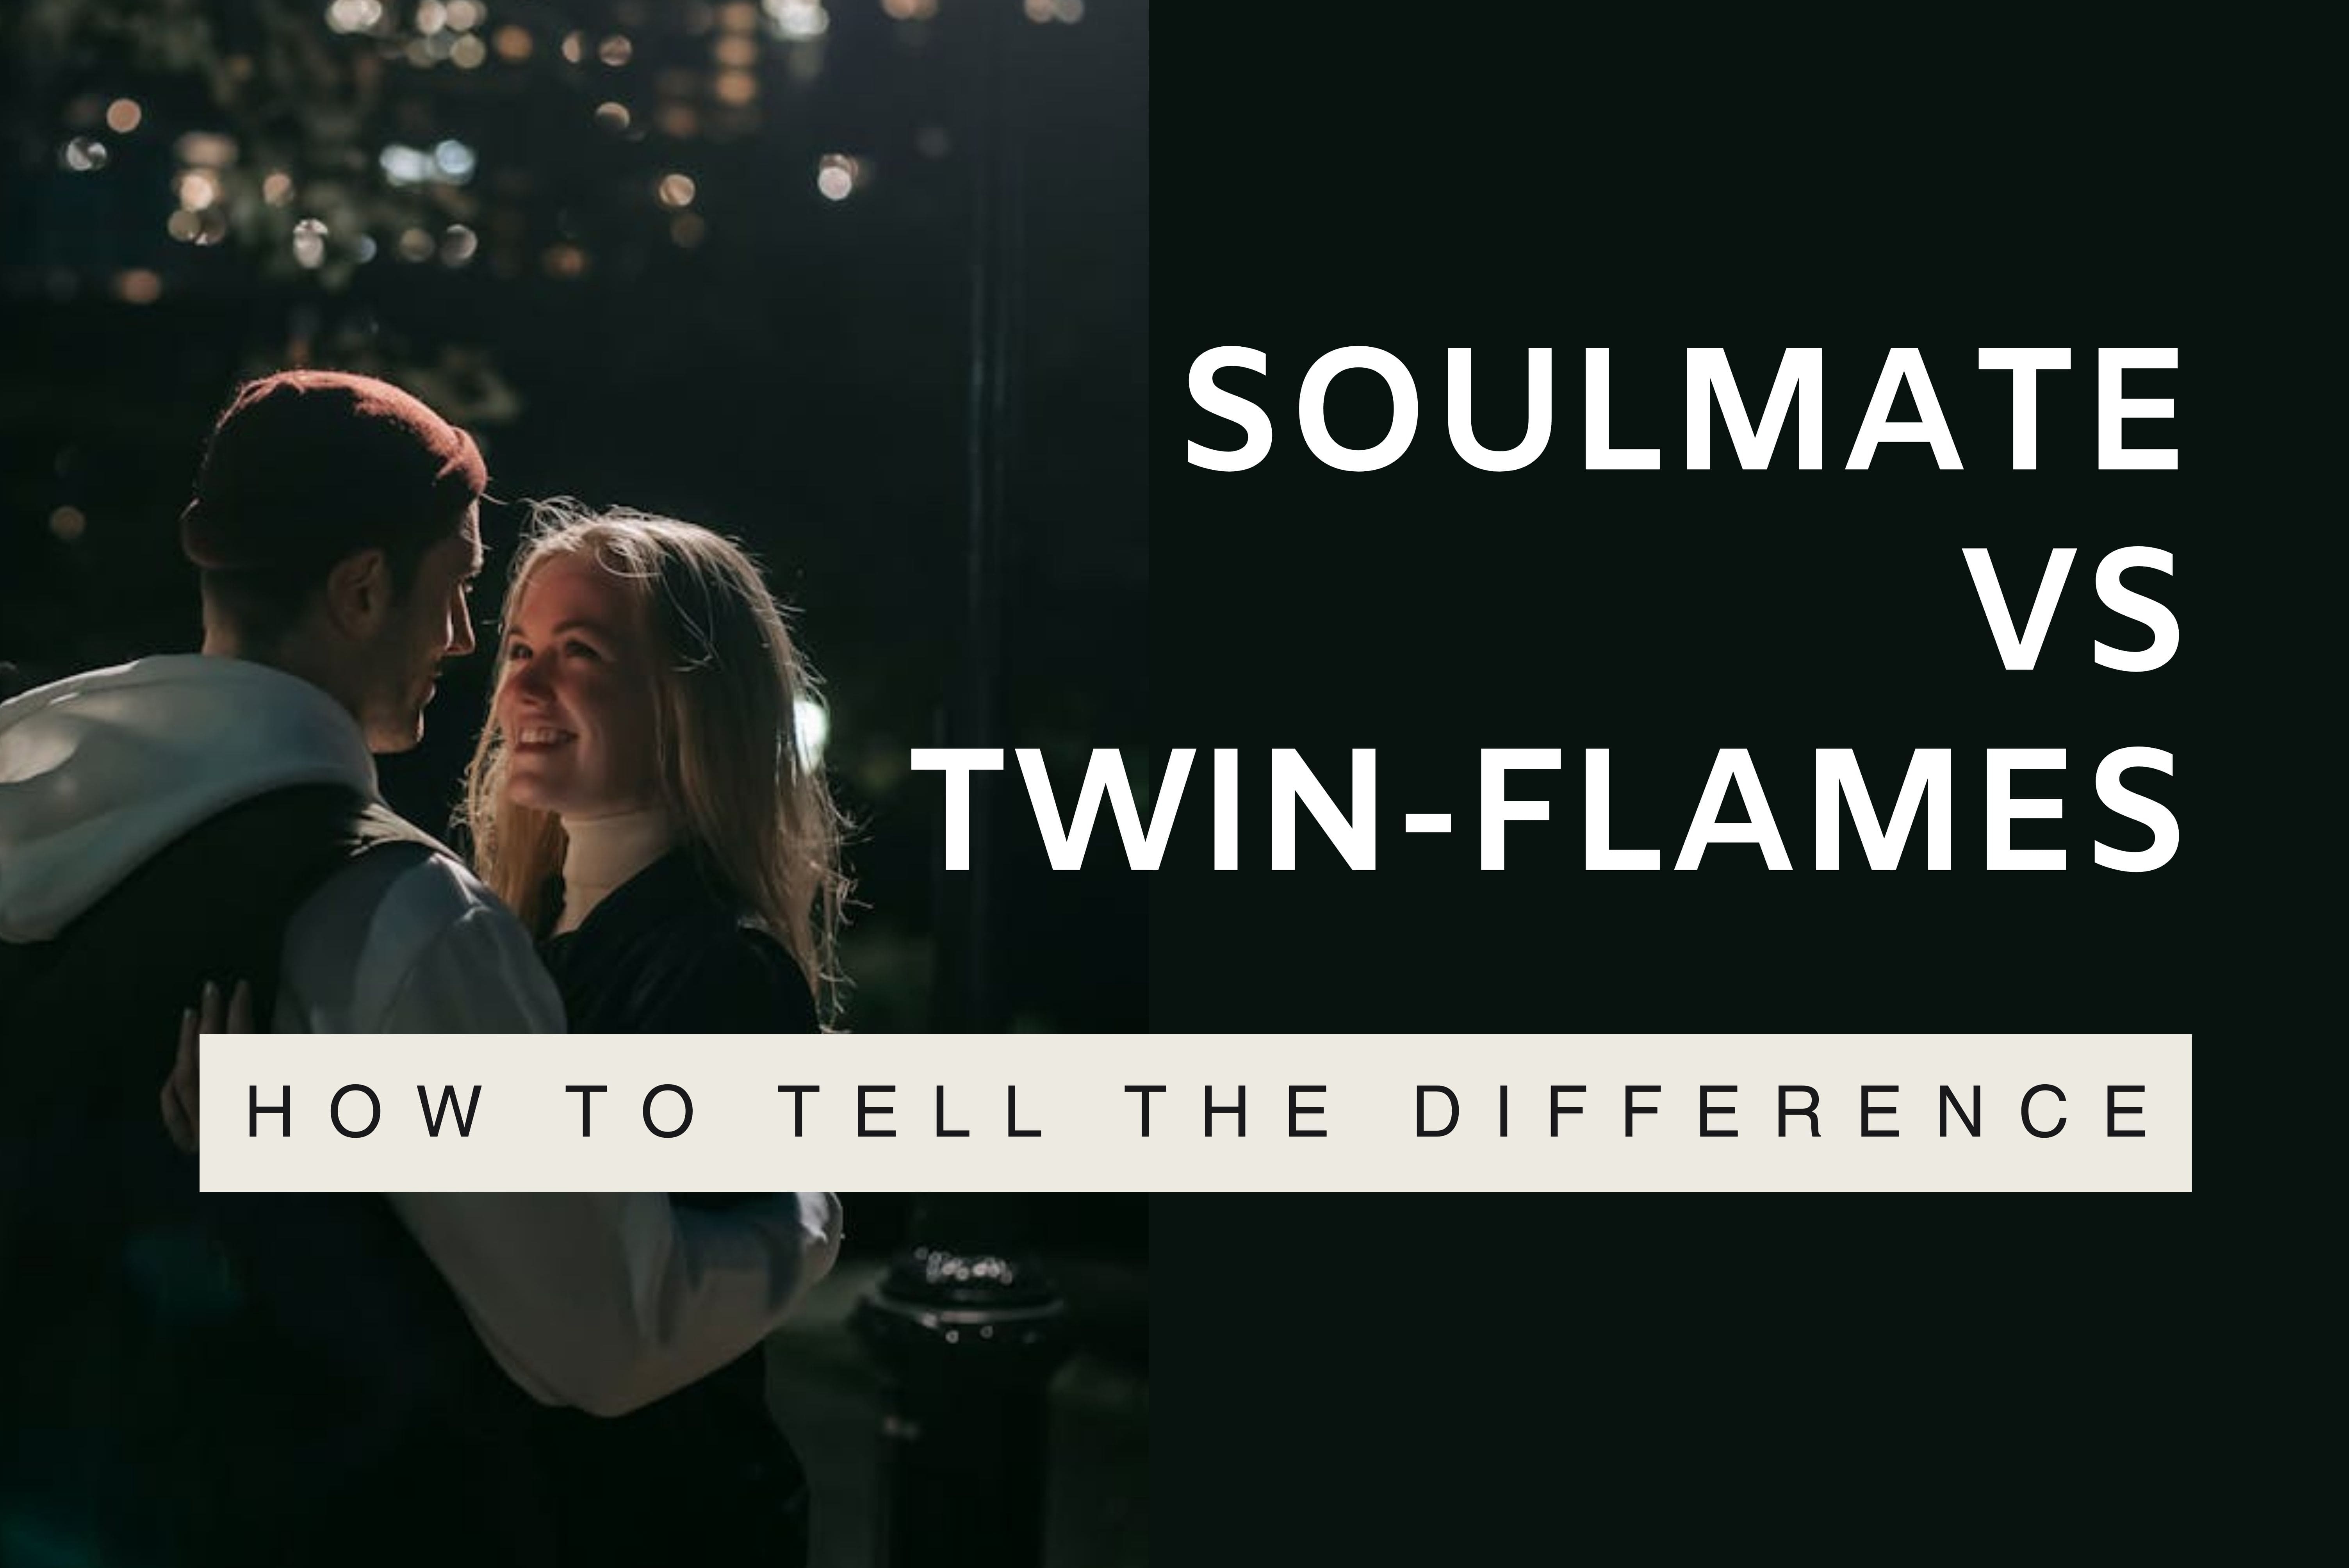 SOULMATE VS TWIN-FLAMES: HOW TO TELL THE DIFFERENCE